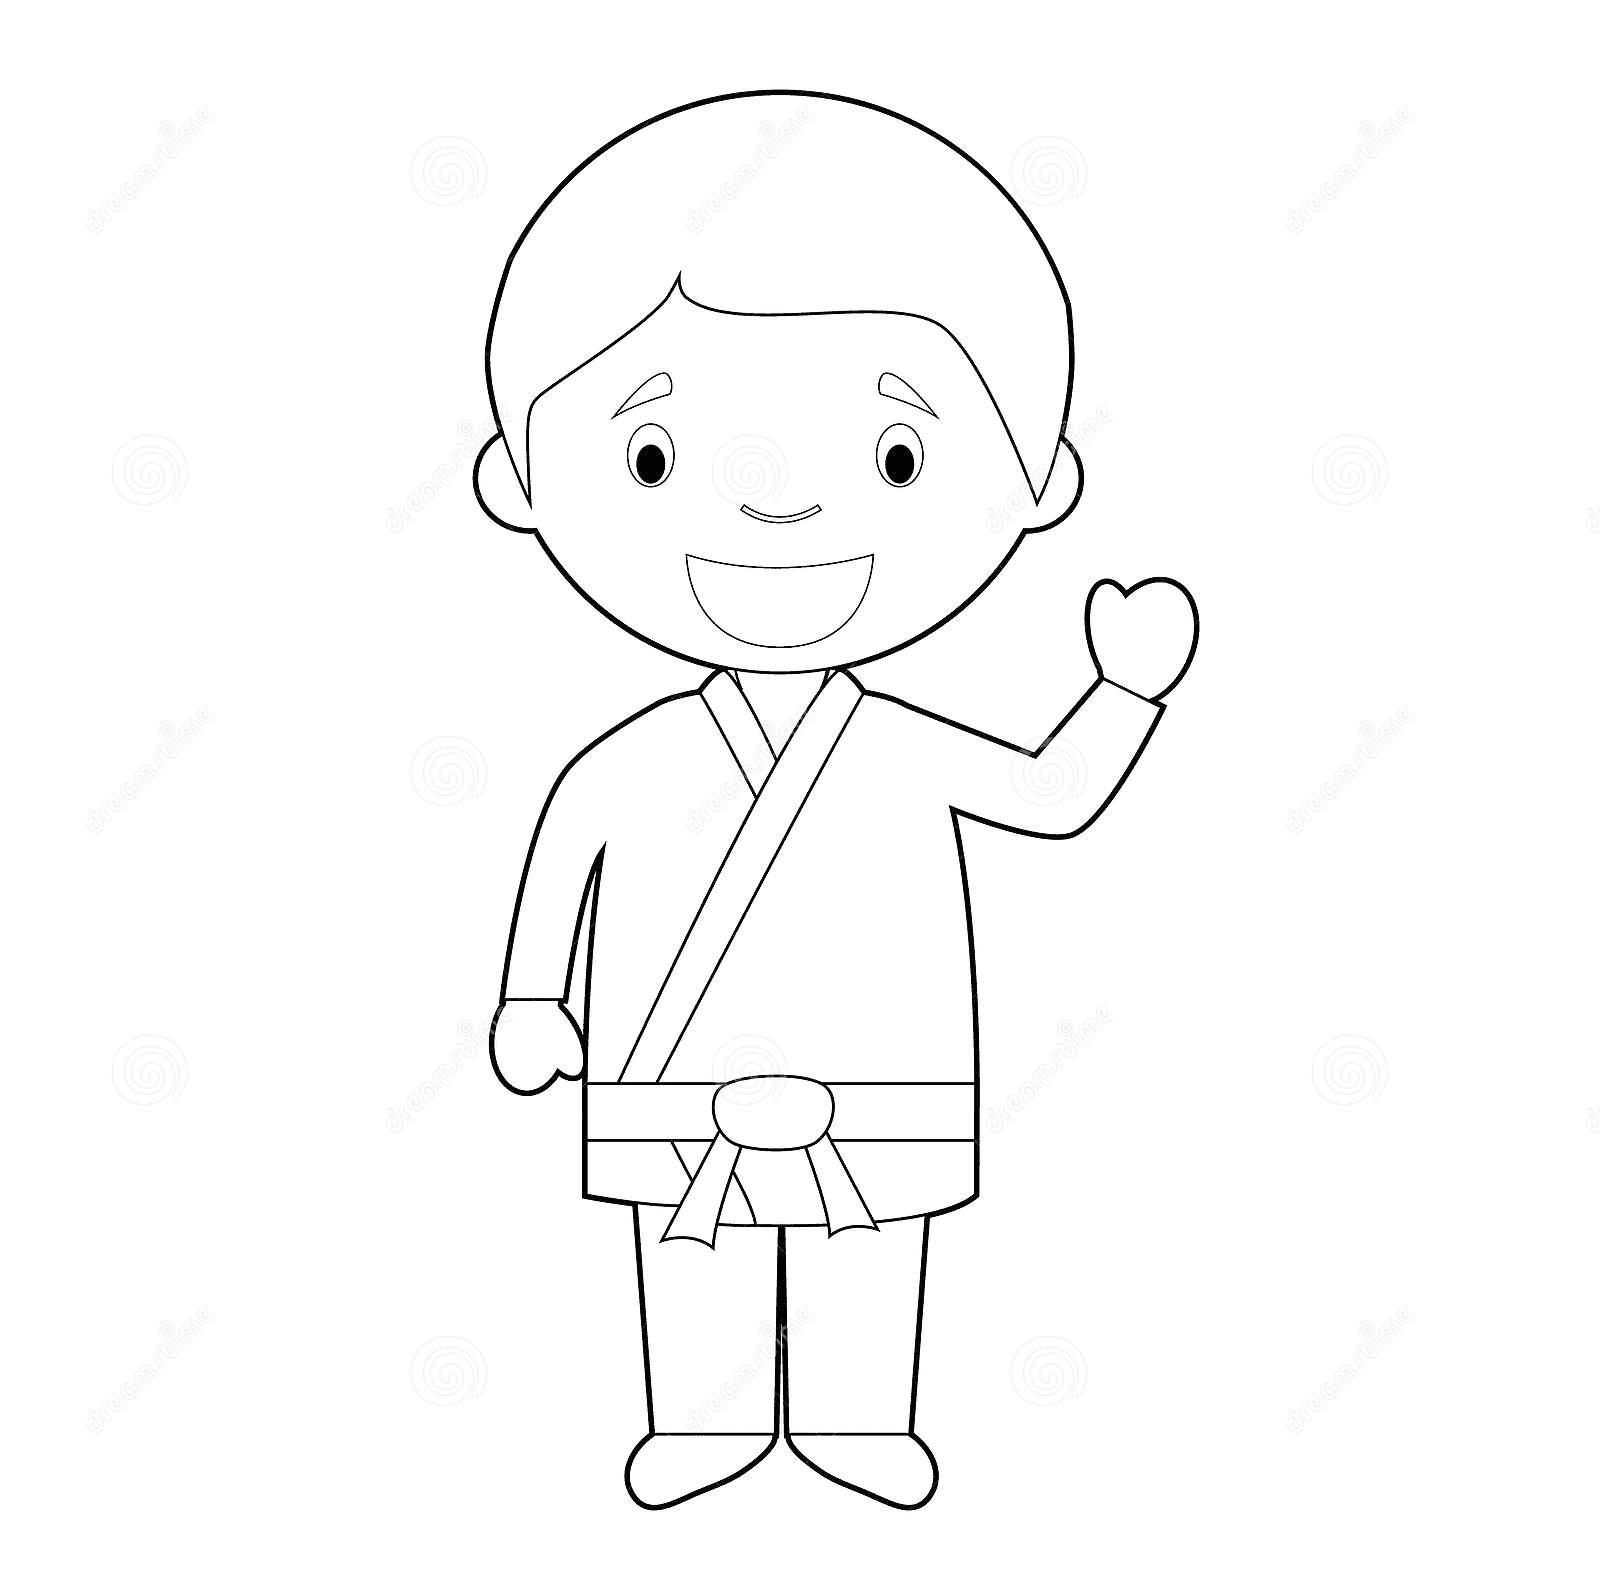 Easy Coloring Cartoon Vector Illustration Of A Karate